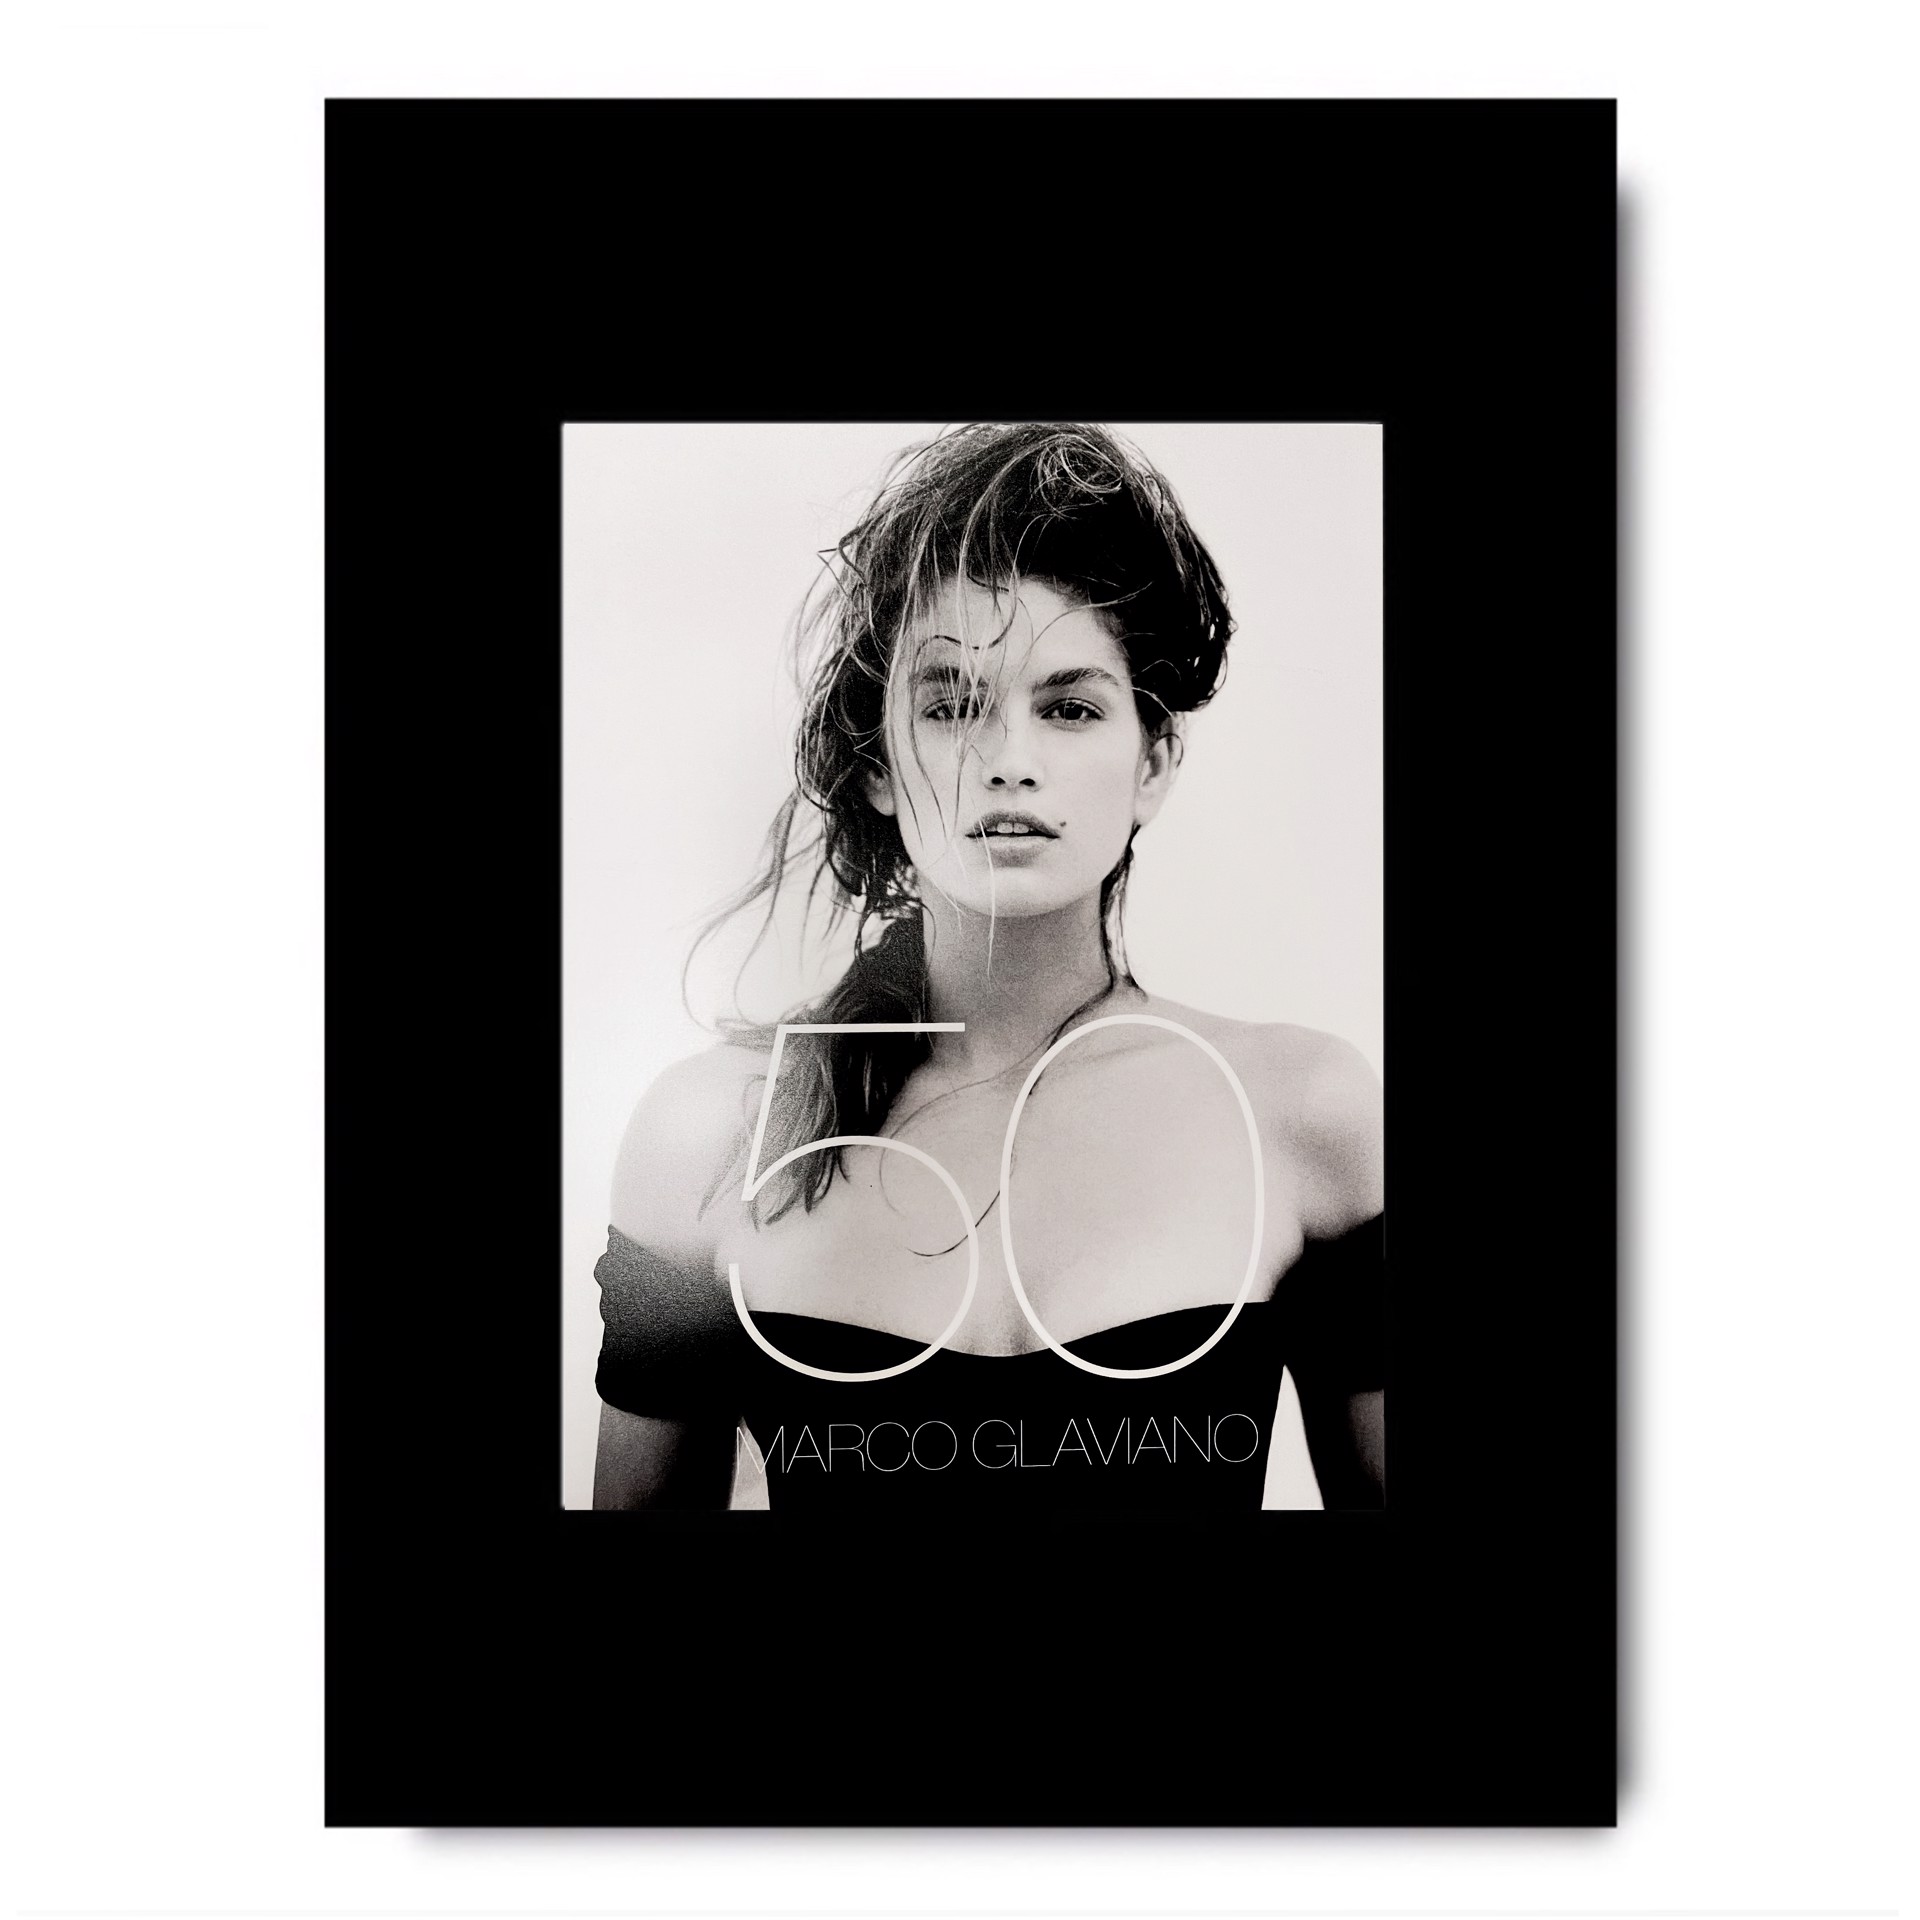 Marco Glaviano 50 [Cindy Crawford, St. Barth, #2 (1991)] by Marco Glaviano